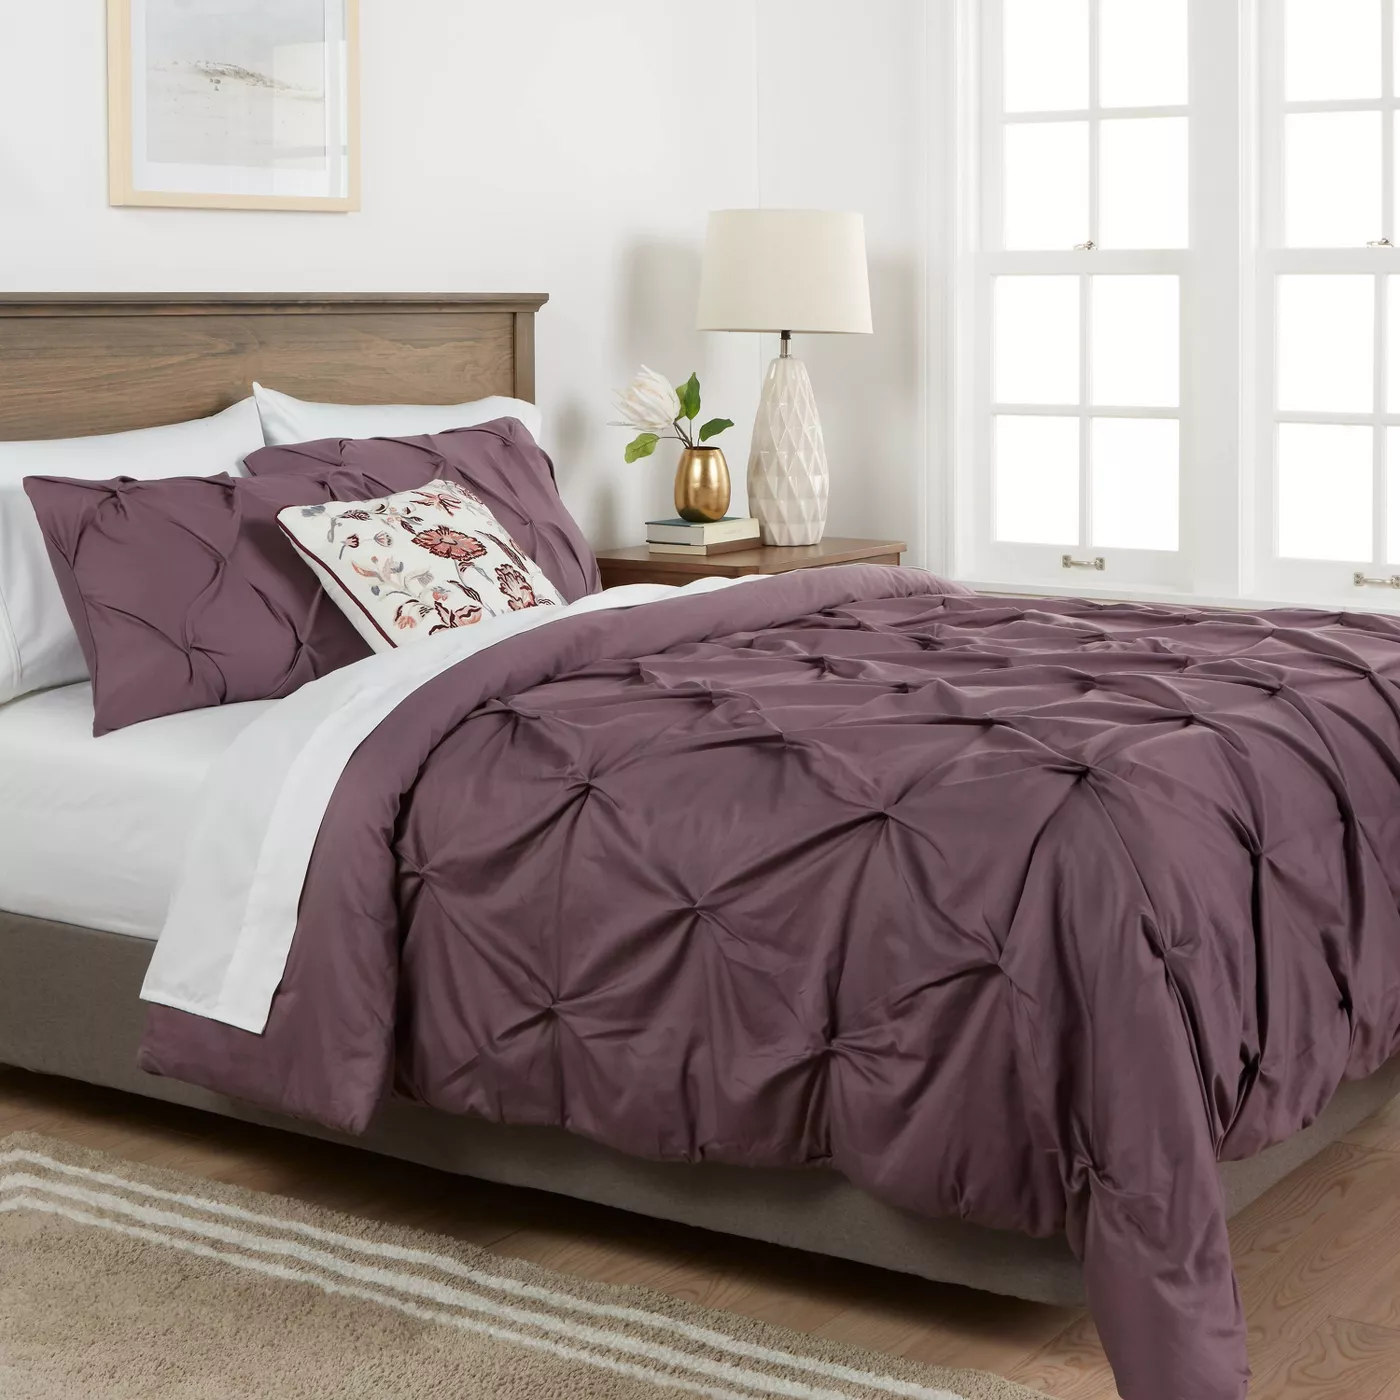 Pinched Pleat Comforter Set - Threshold™ - image 2 of 5